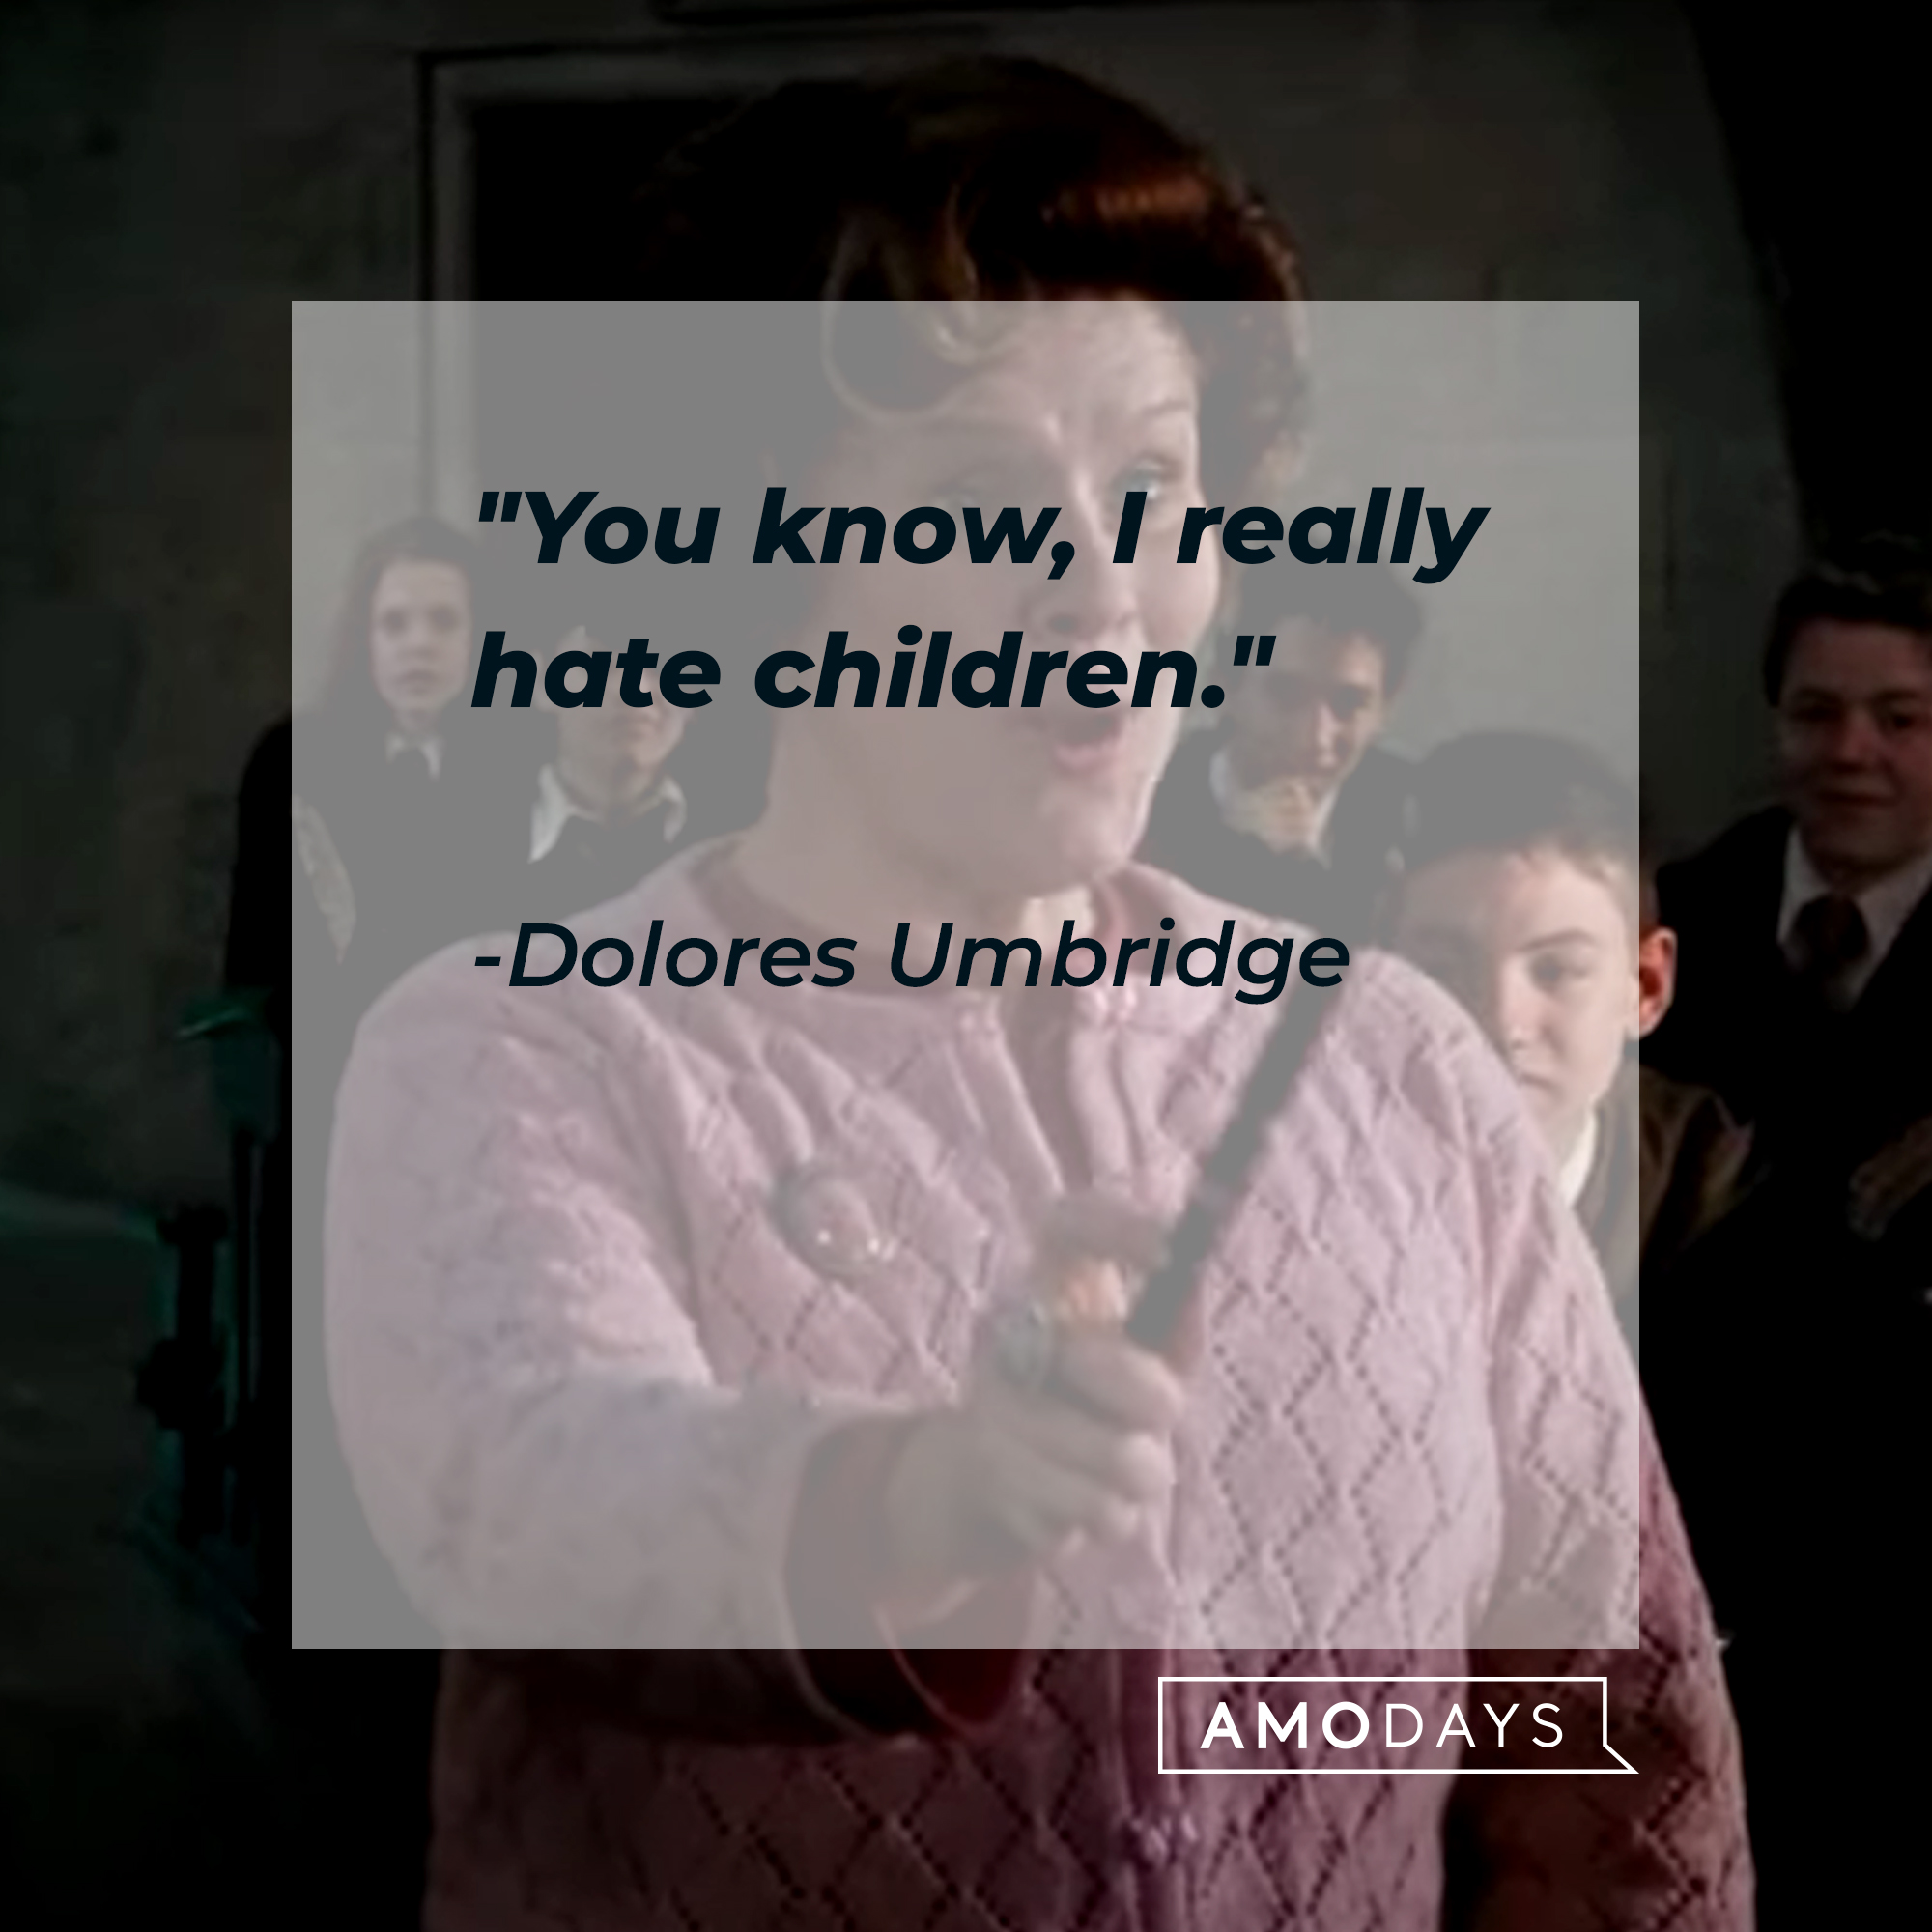 A photo of Dolores Umbridge with the quote, "You know, I really hate children." | Source: Facebook/harrypotter